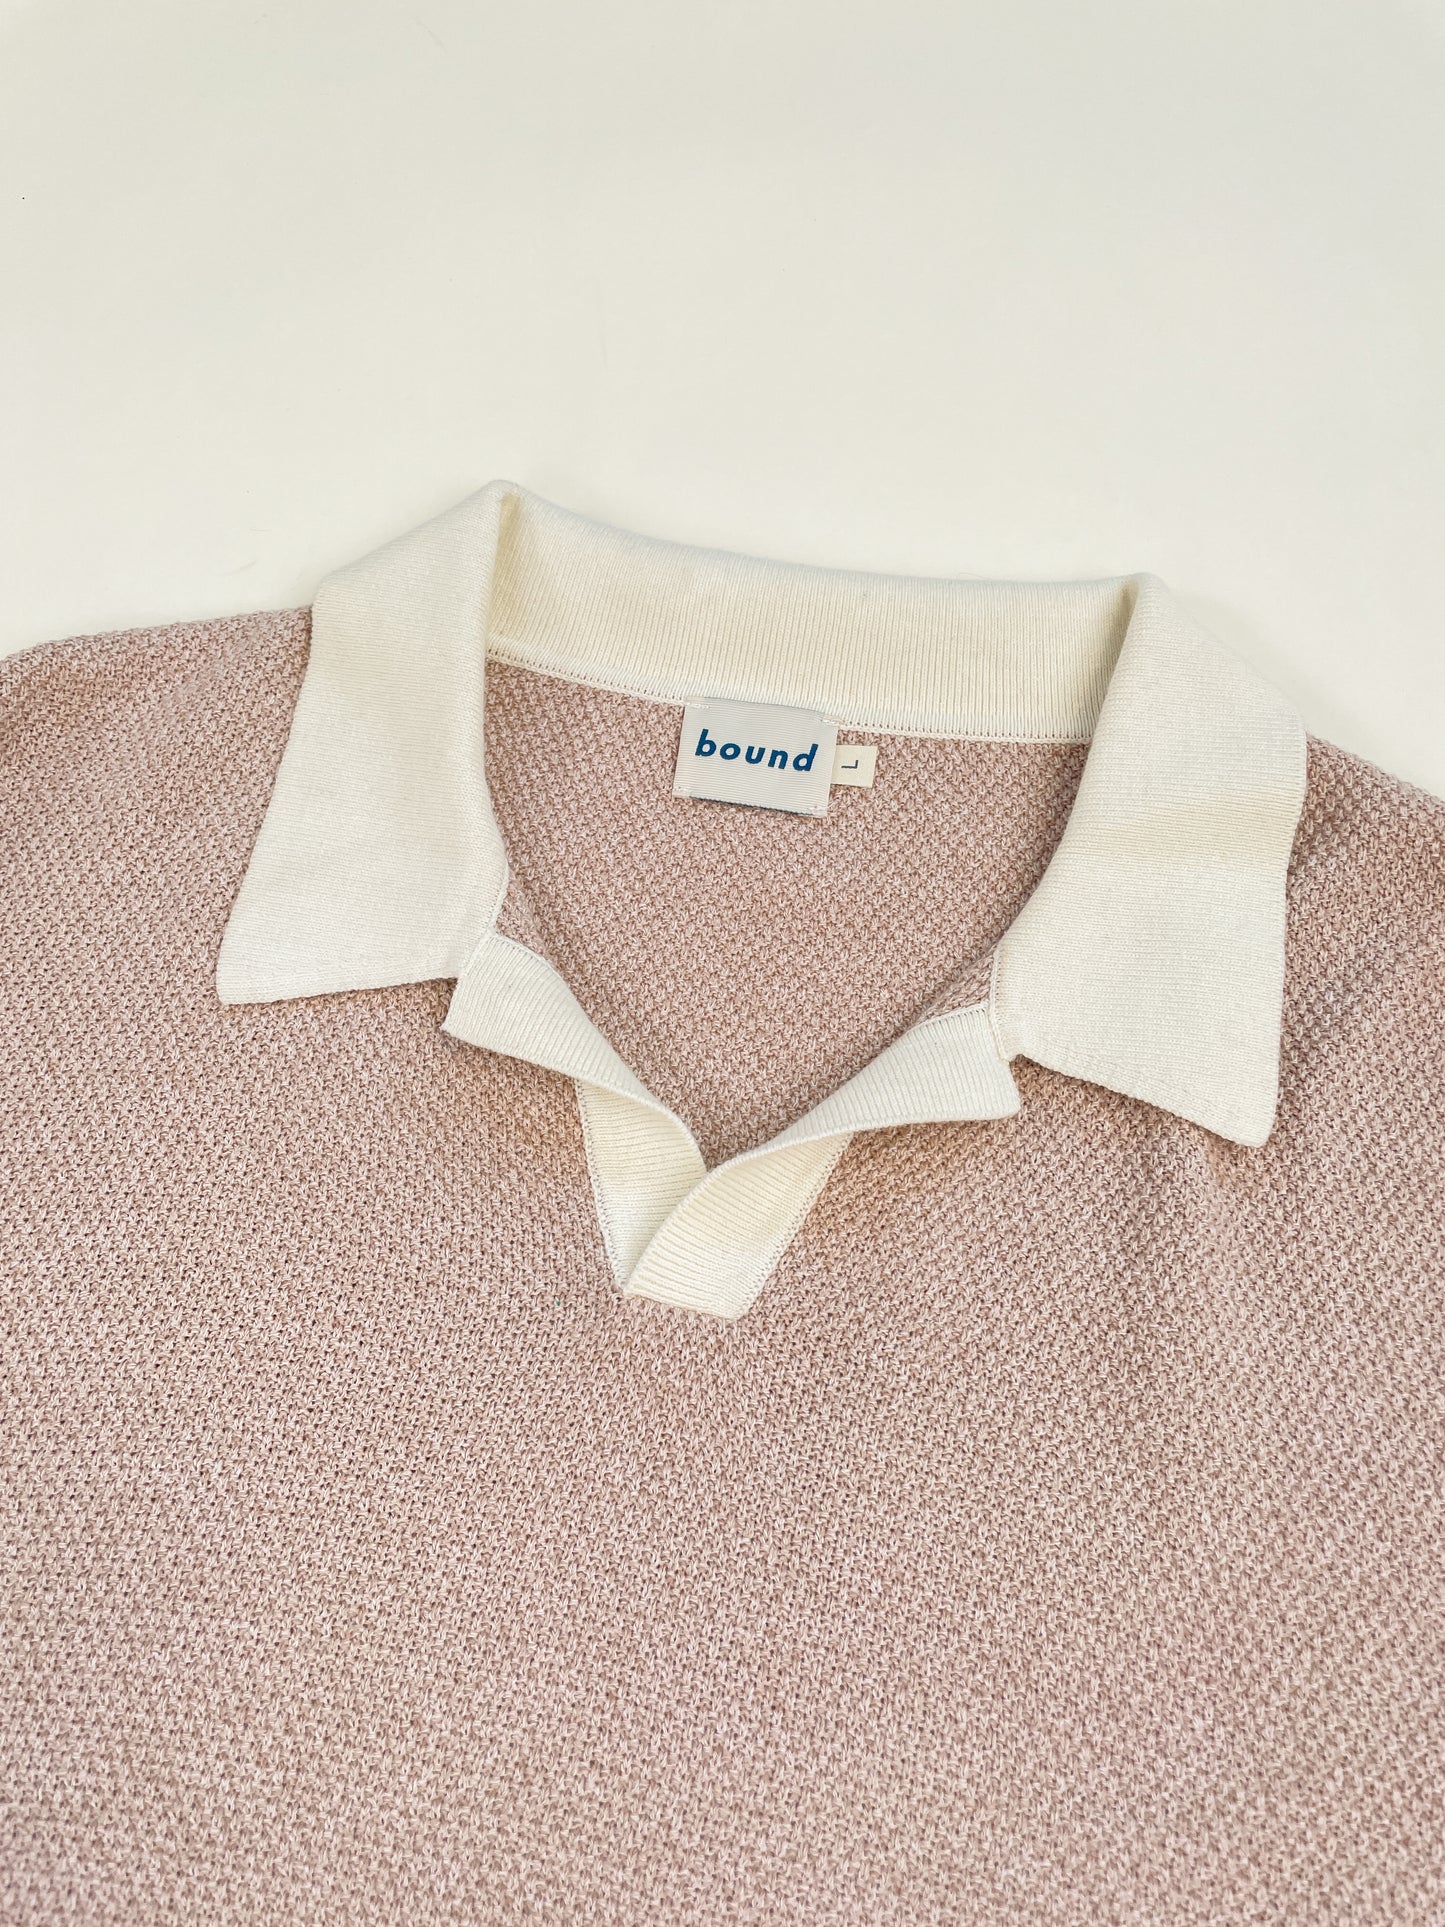 TEXTURED KNIT POLO - OATMEAL